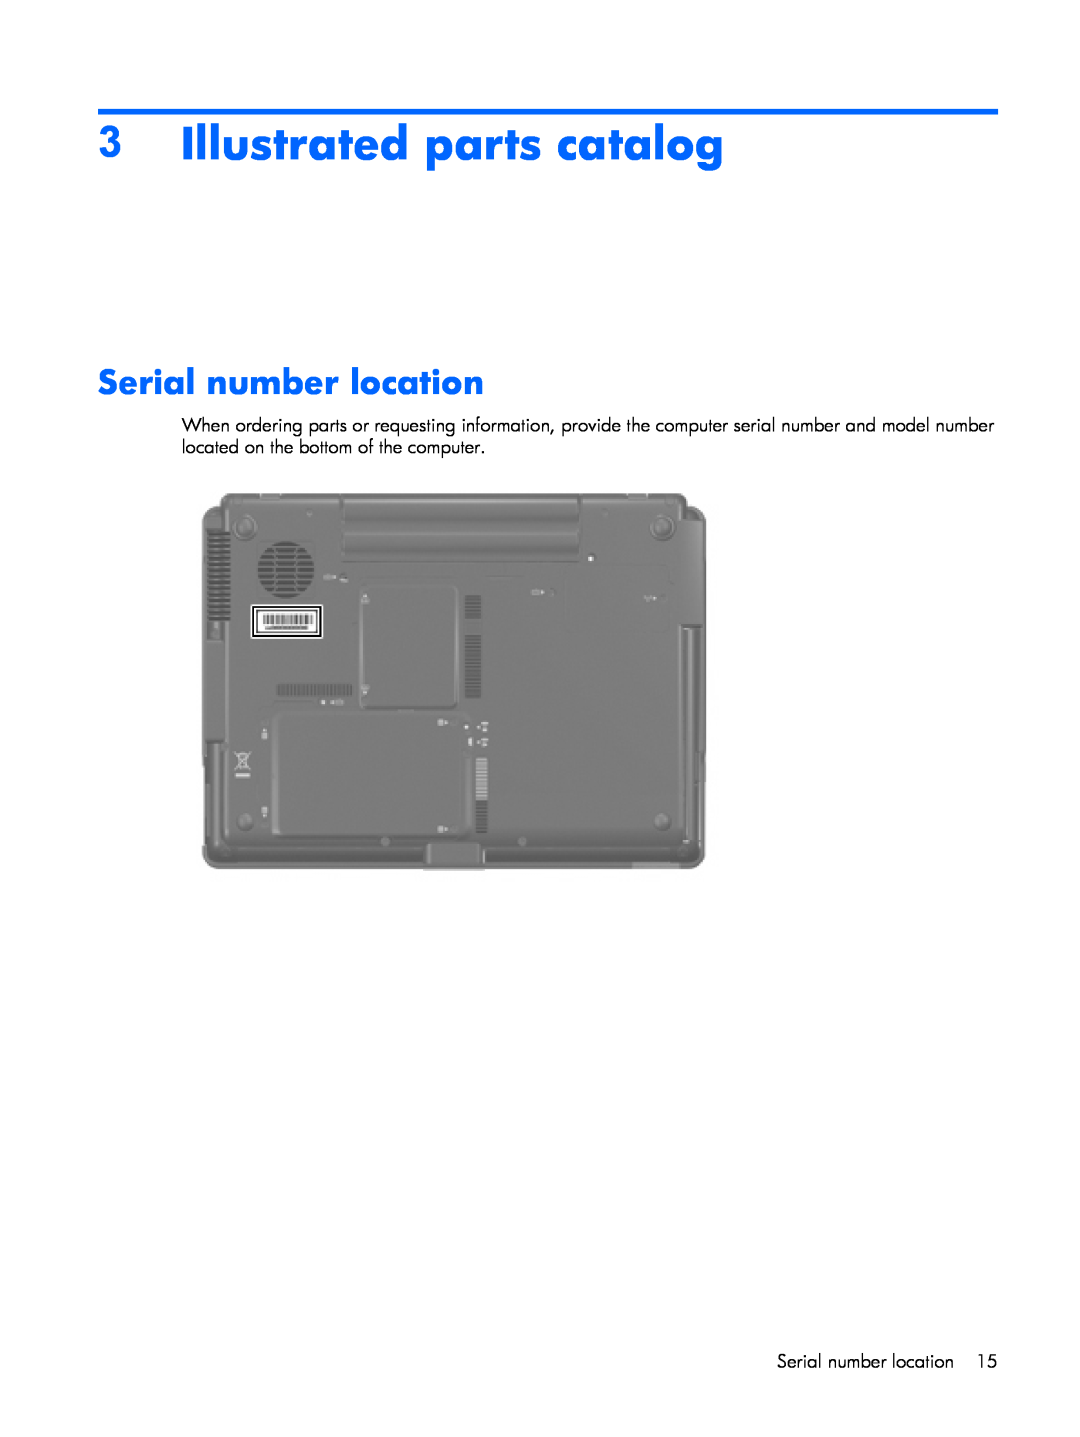 HP B1248TU, B1201VU, B1203VU, B1200, B1205VU, B1204VU, B1298TU, B1250TU manual Illustrated parts catalog, Serial number location 